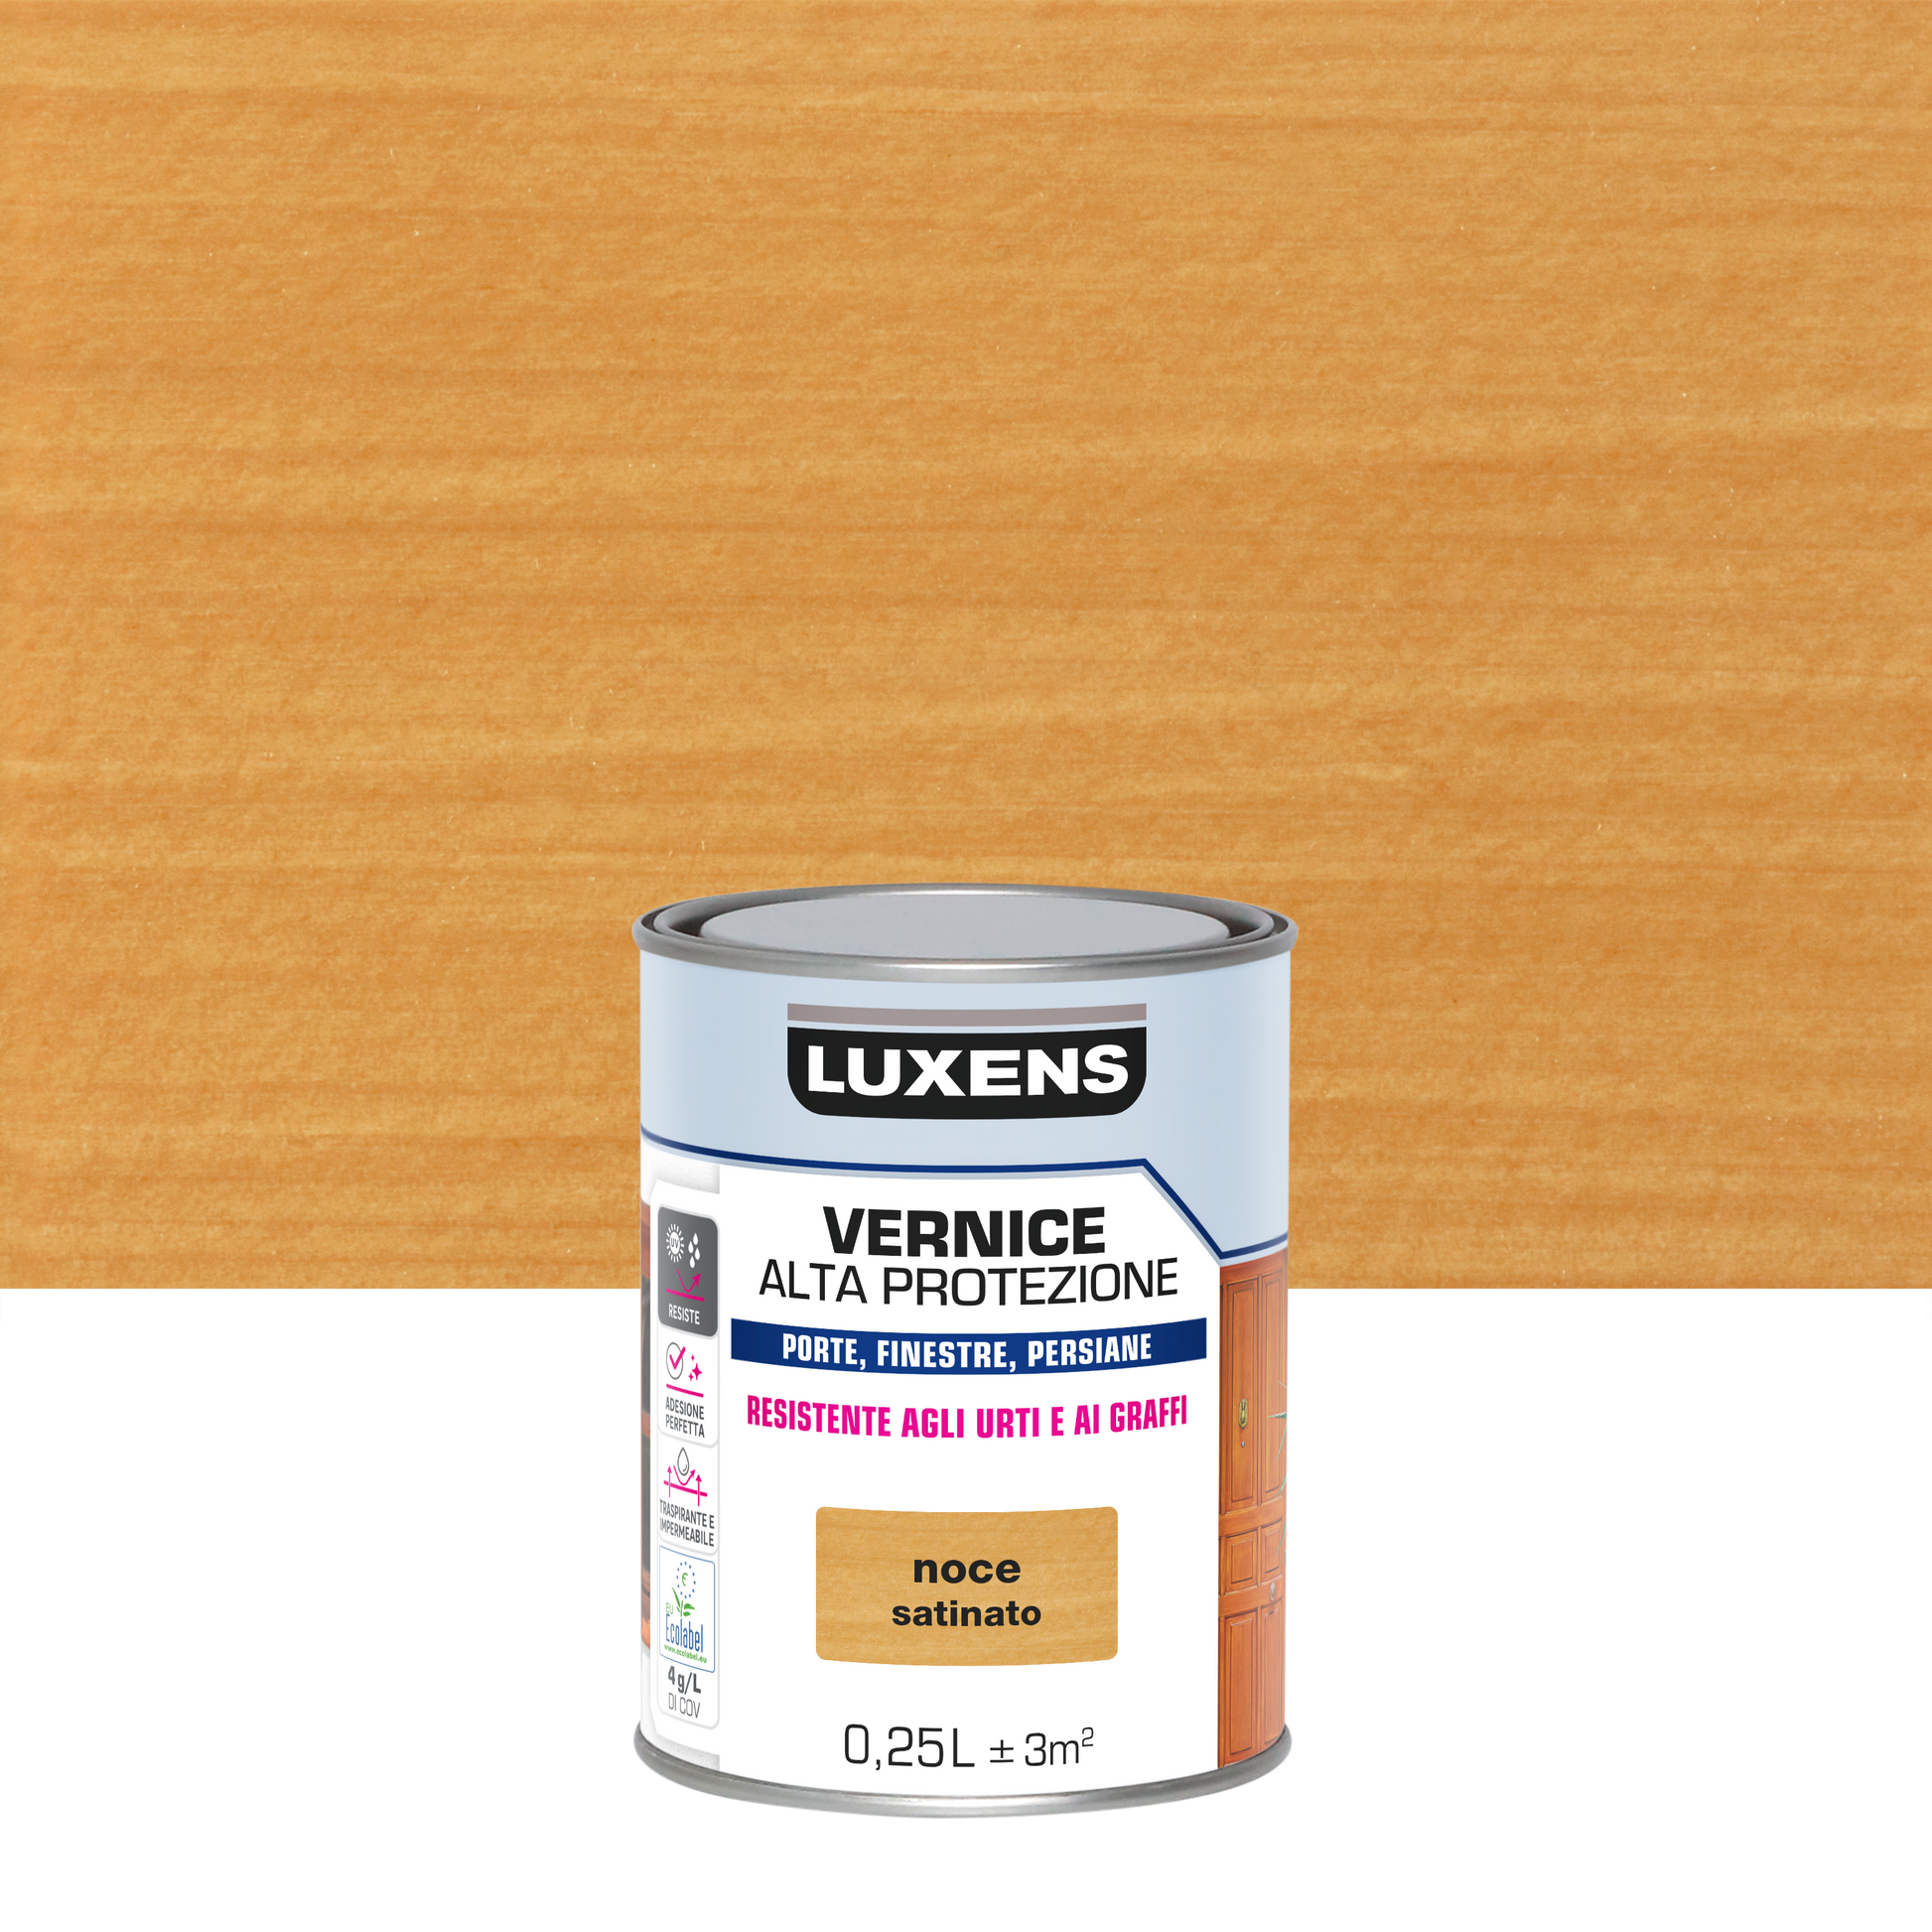 LUXENS HIGH-PROTECTION SATIN WALNUT WATER-BASED WOOD VARNISH 250 ML